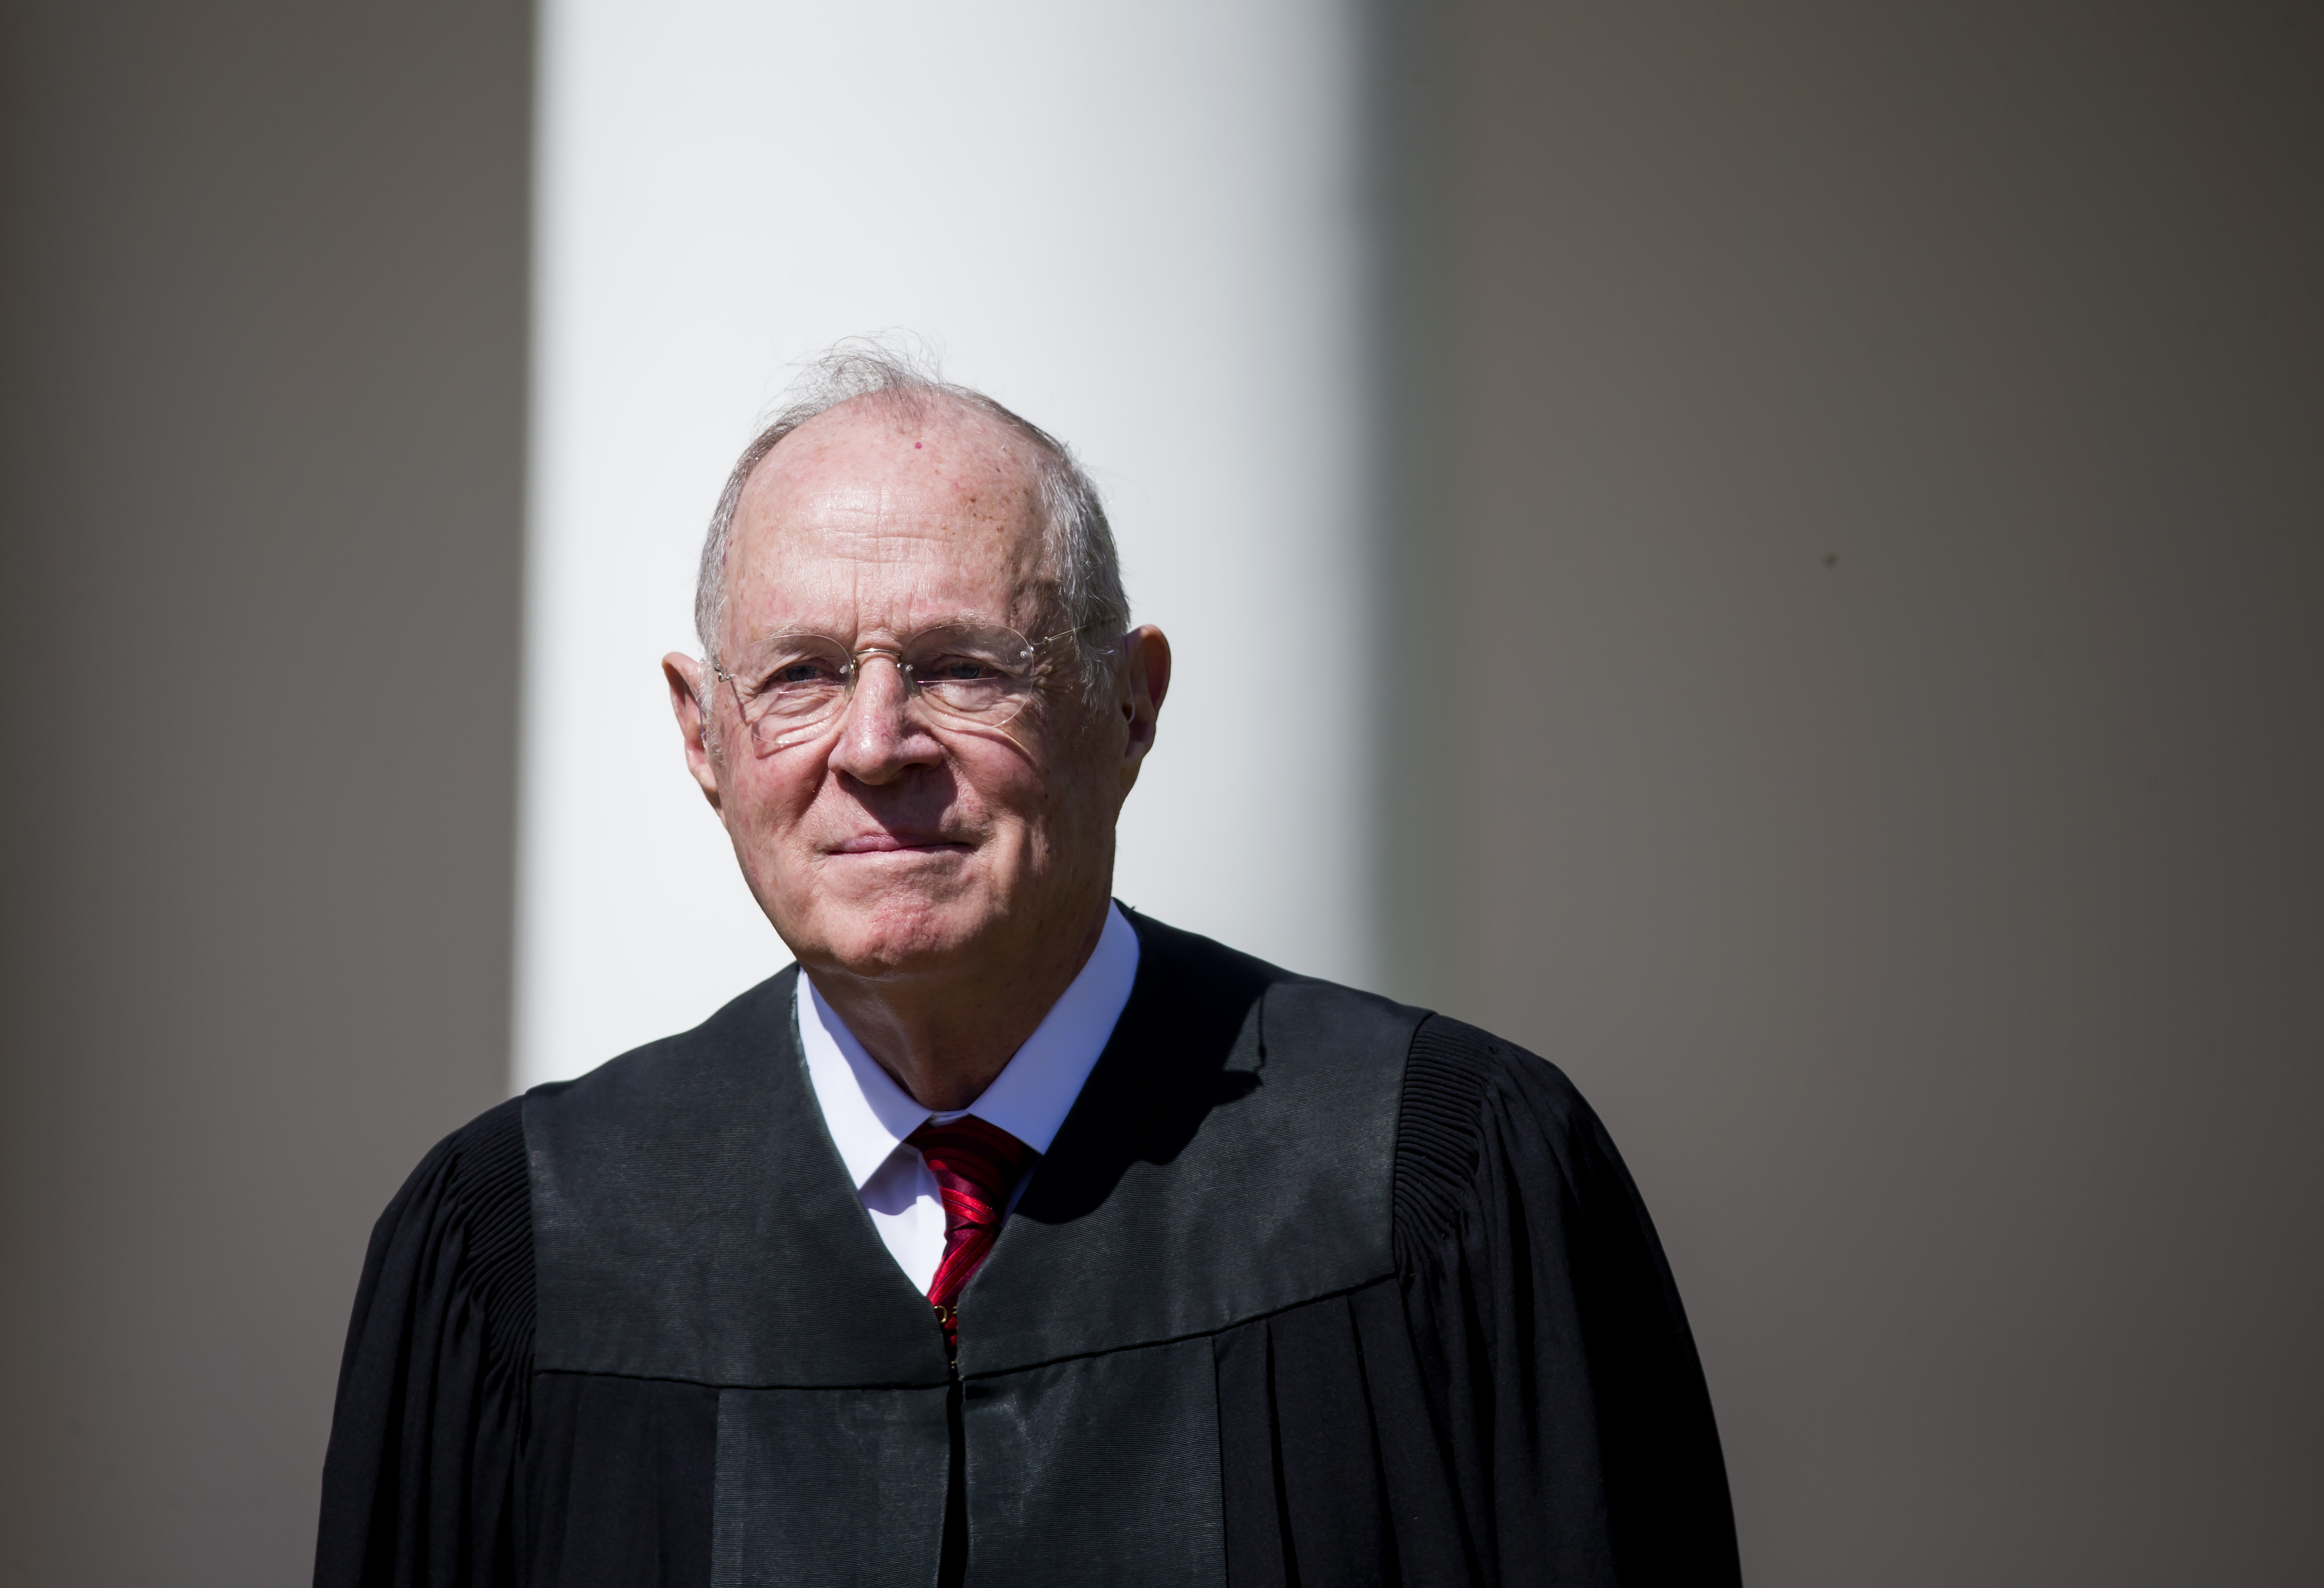 Anthony Kennedy in the Rose Garden